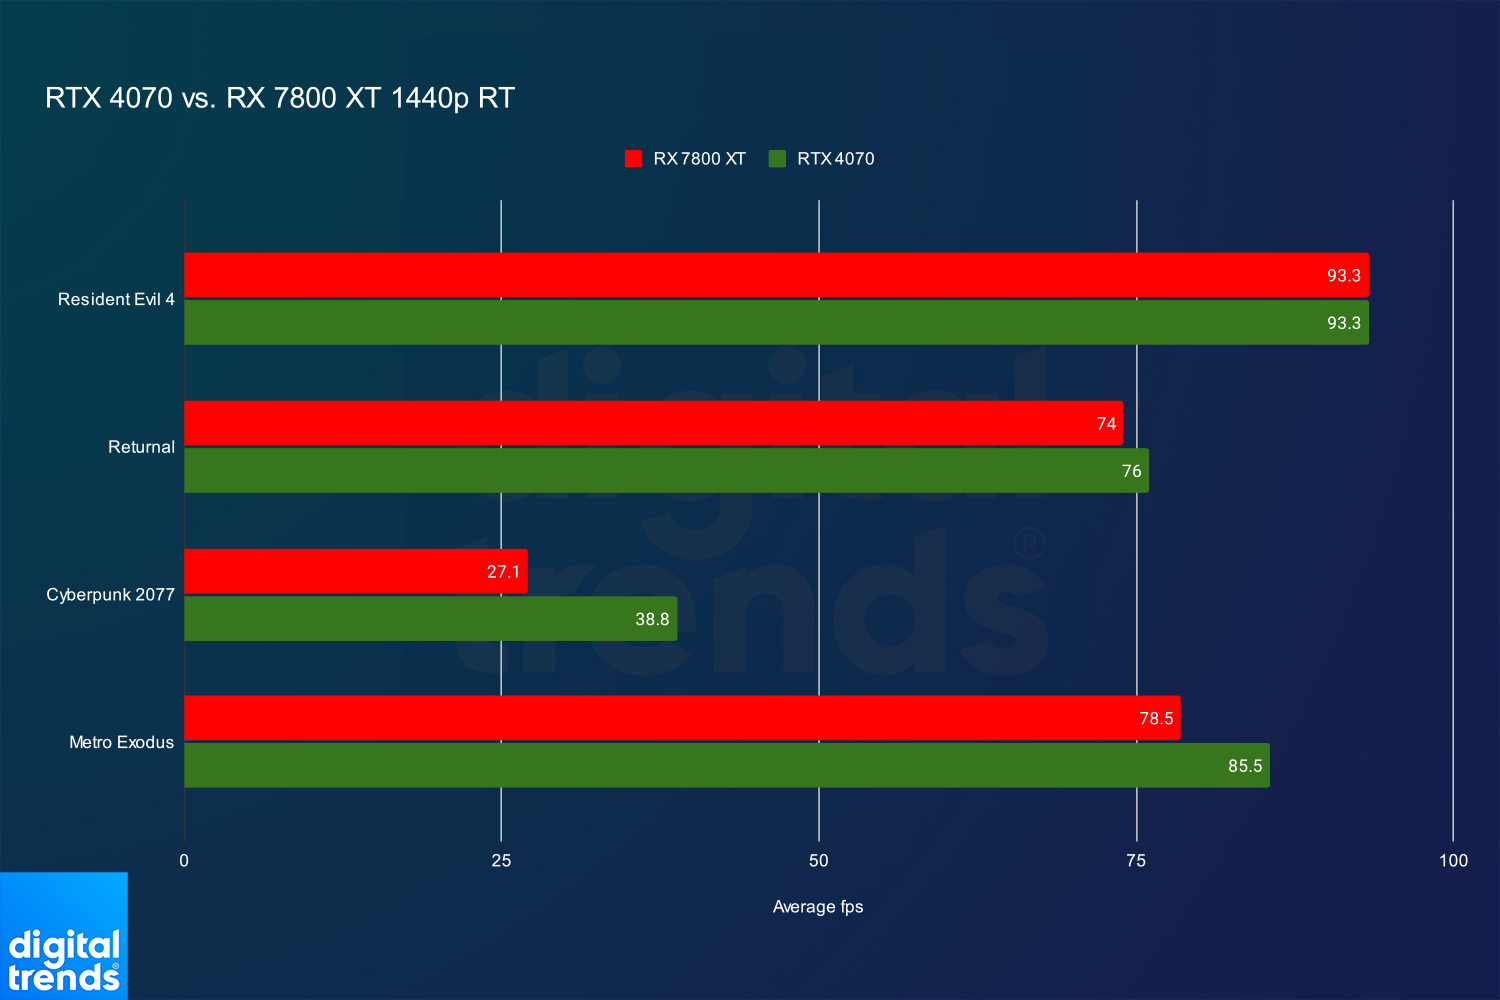 Ray tracing benchmarks for the RX 7800 XT and the RTX 4070, done at 1440p.